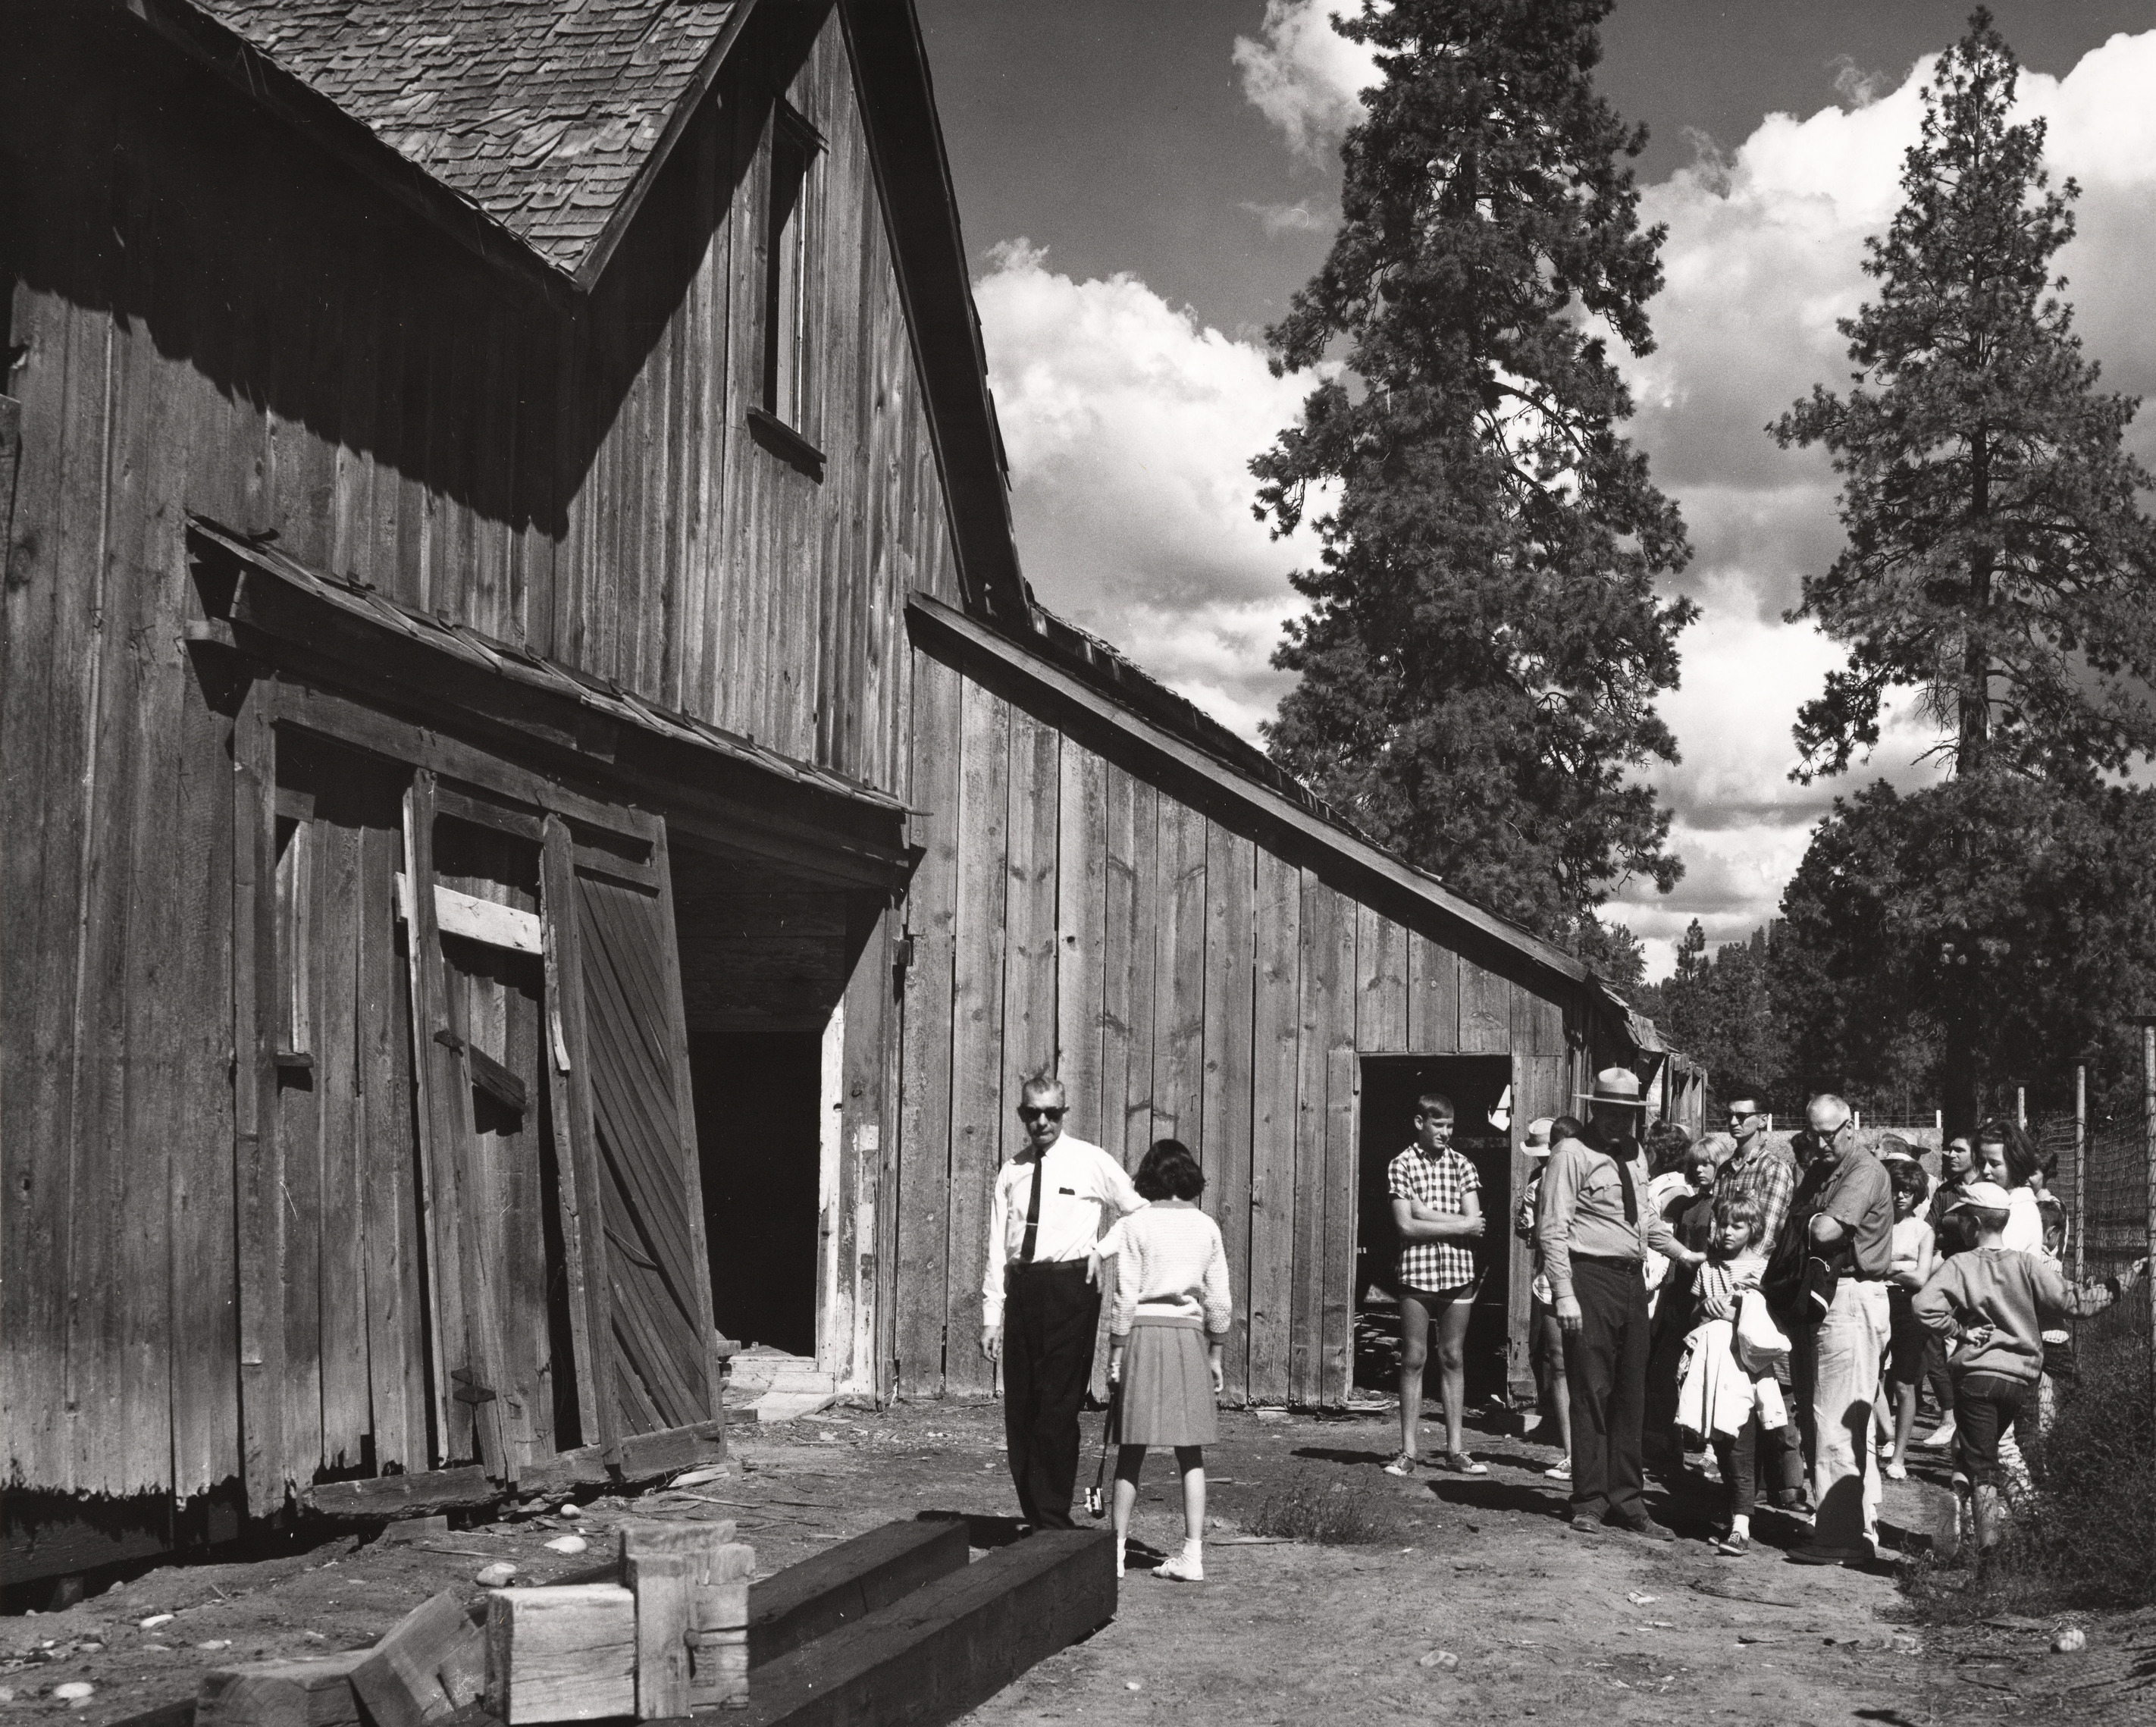 Black and white photograph of a crowd of people in front of a barn